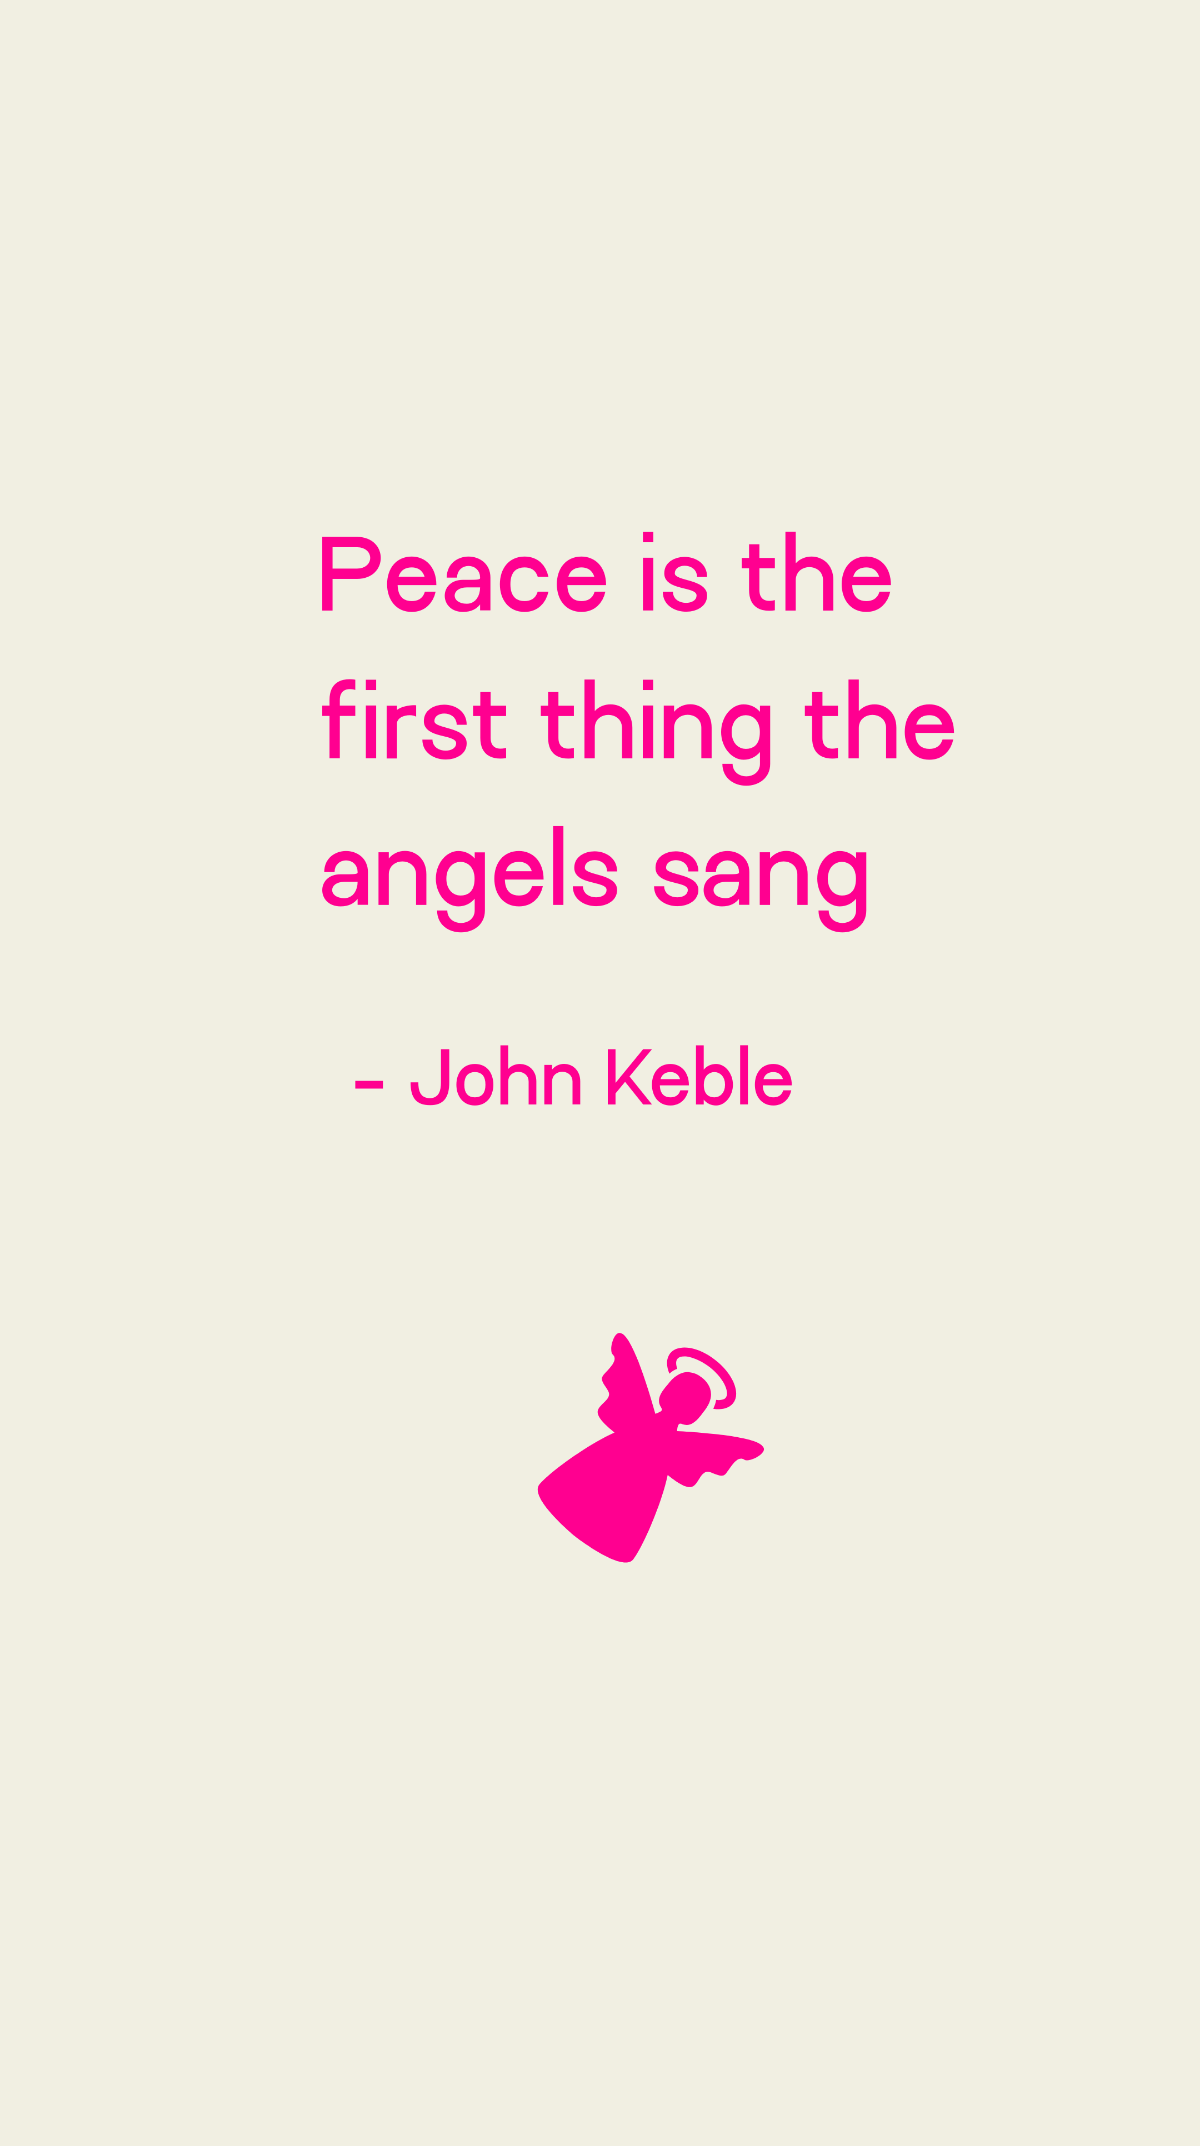 Free John Keble - Peace is the first thing the angels sang Template